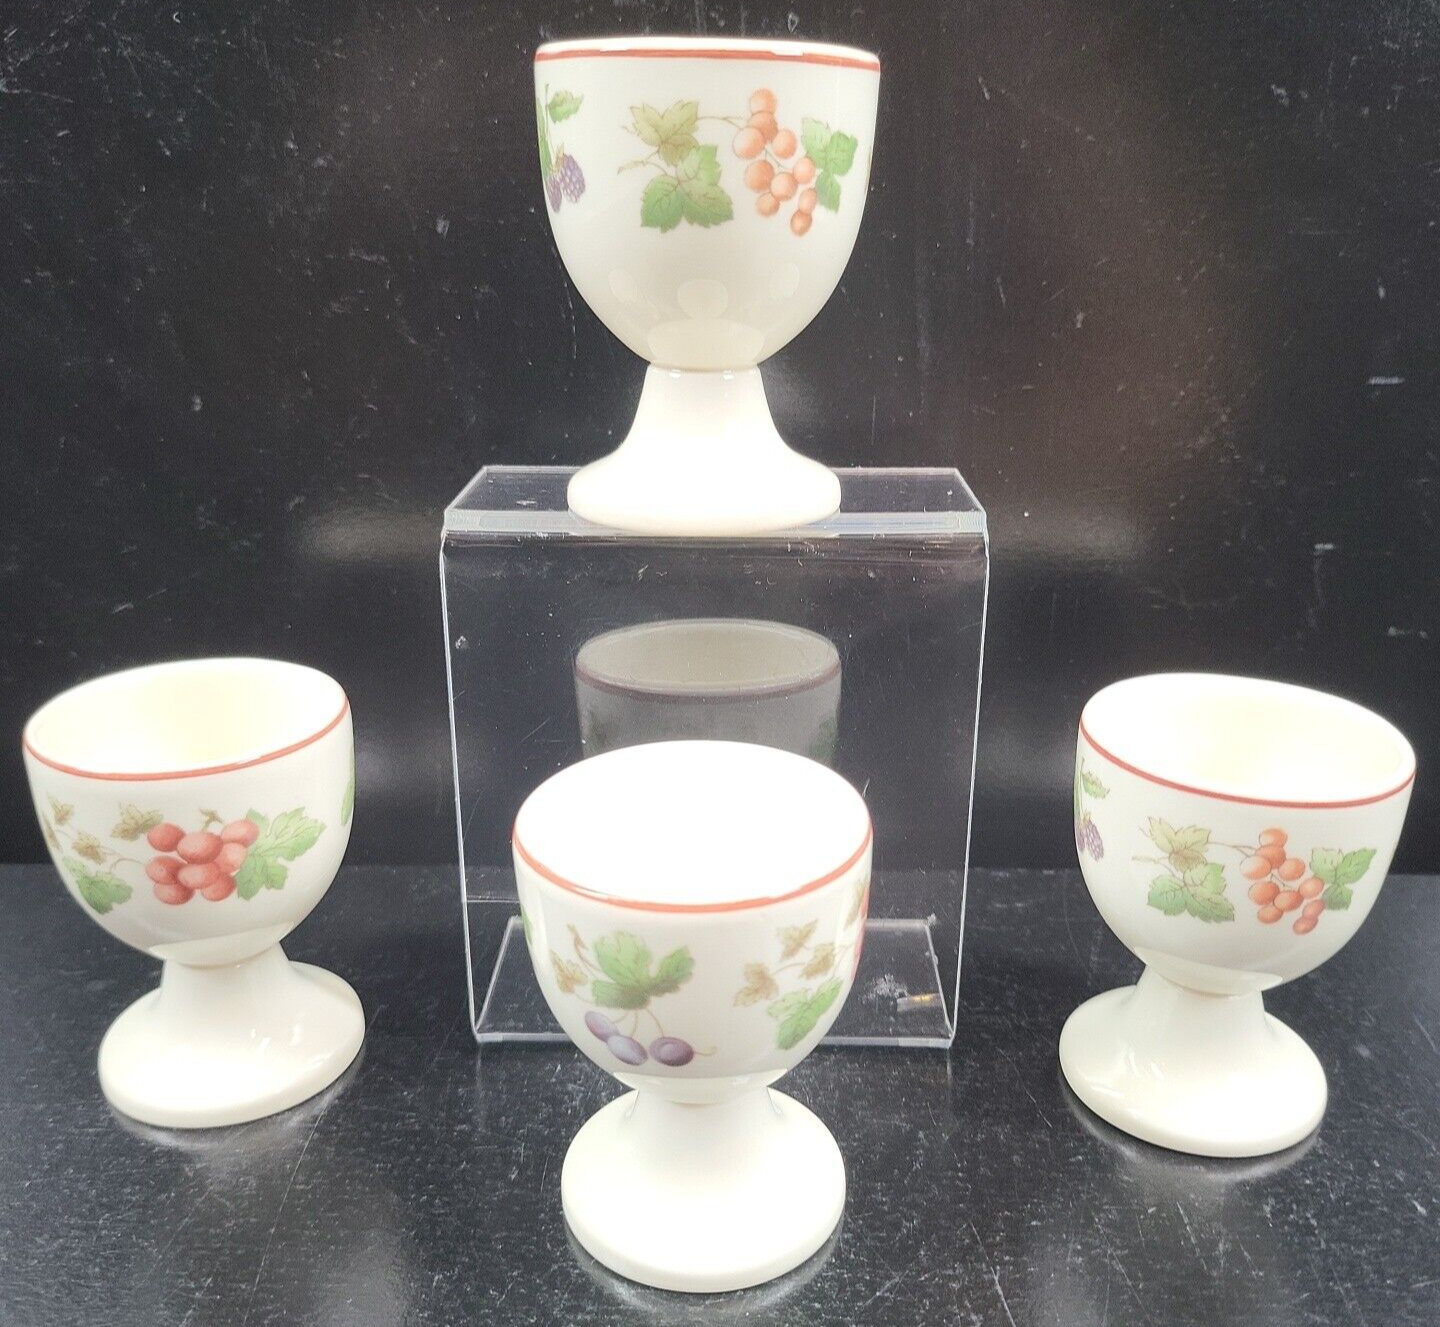 Primary image for 4 Wedgwood Provence Queensware Egg Cups Set Vintage Fruit England Retro Dish Lot